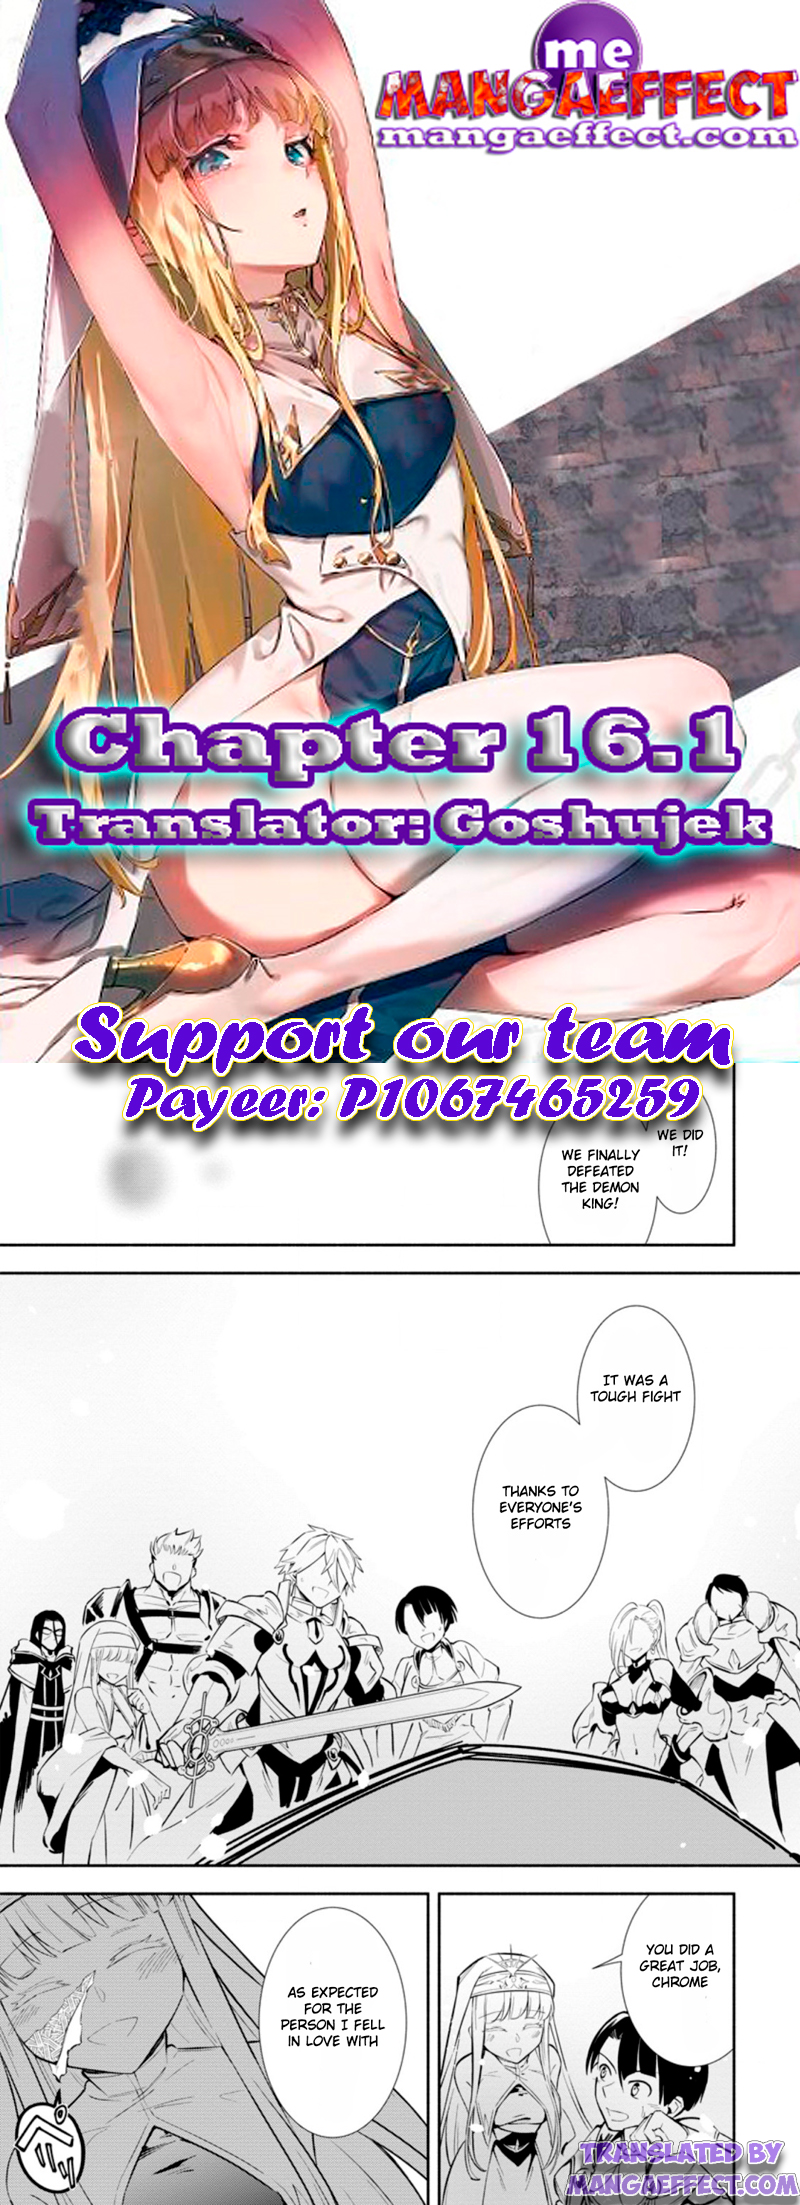 My Lover Was Stolen, and I Was Kicked Out of the Hero’s Party, but I Awakened to the EX Skill “Fixed Damage” and Became Invincible. Now, Let’s Begin Some Revenge - chapter 16.1 - #1